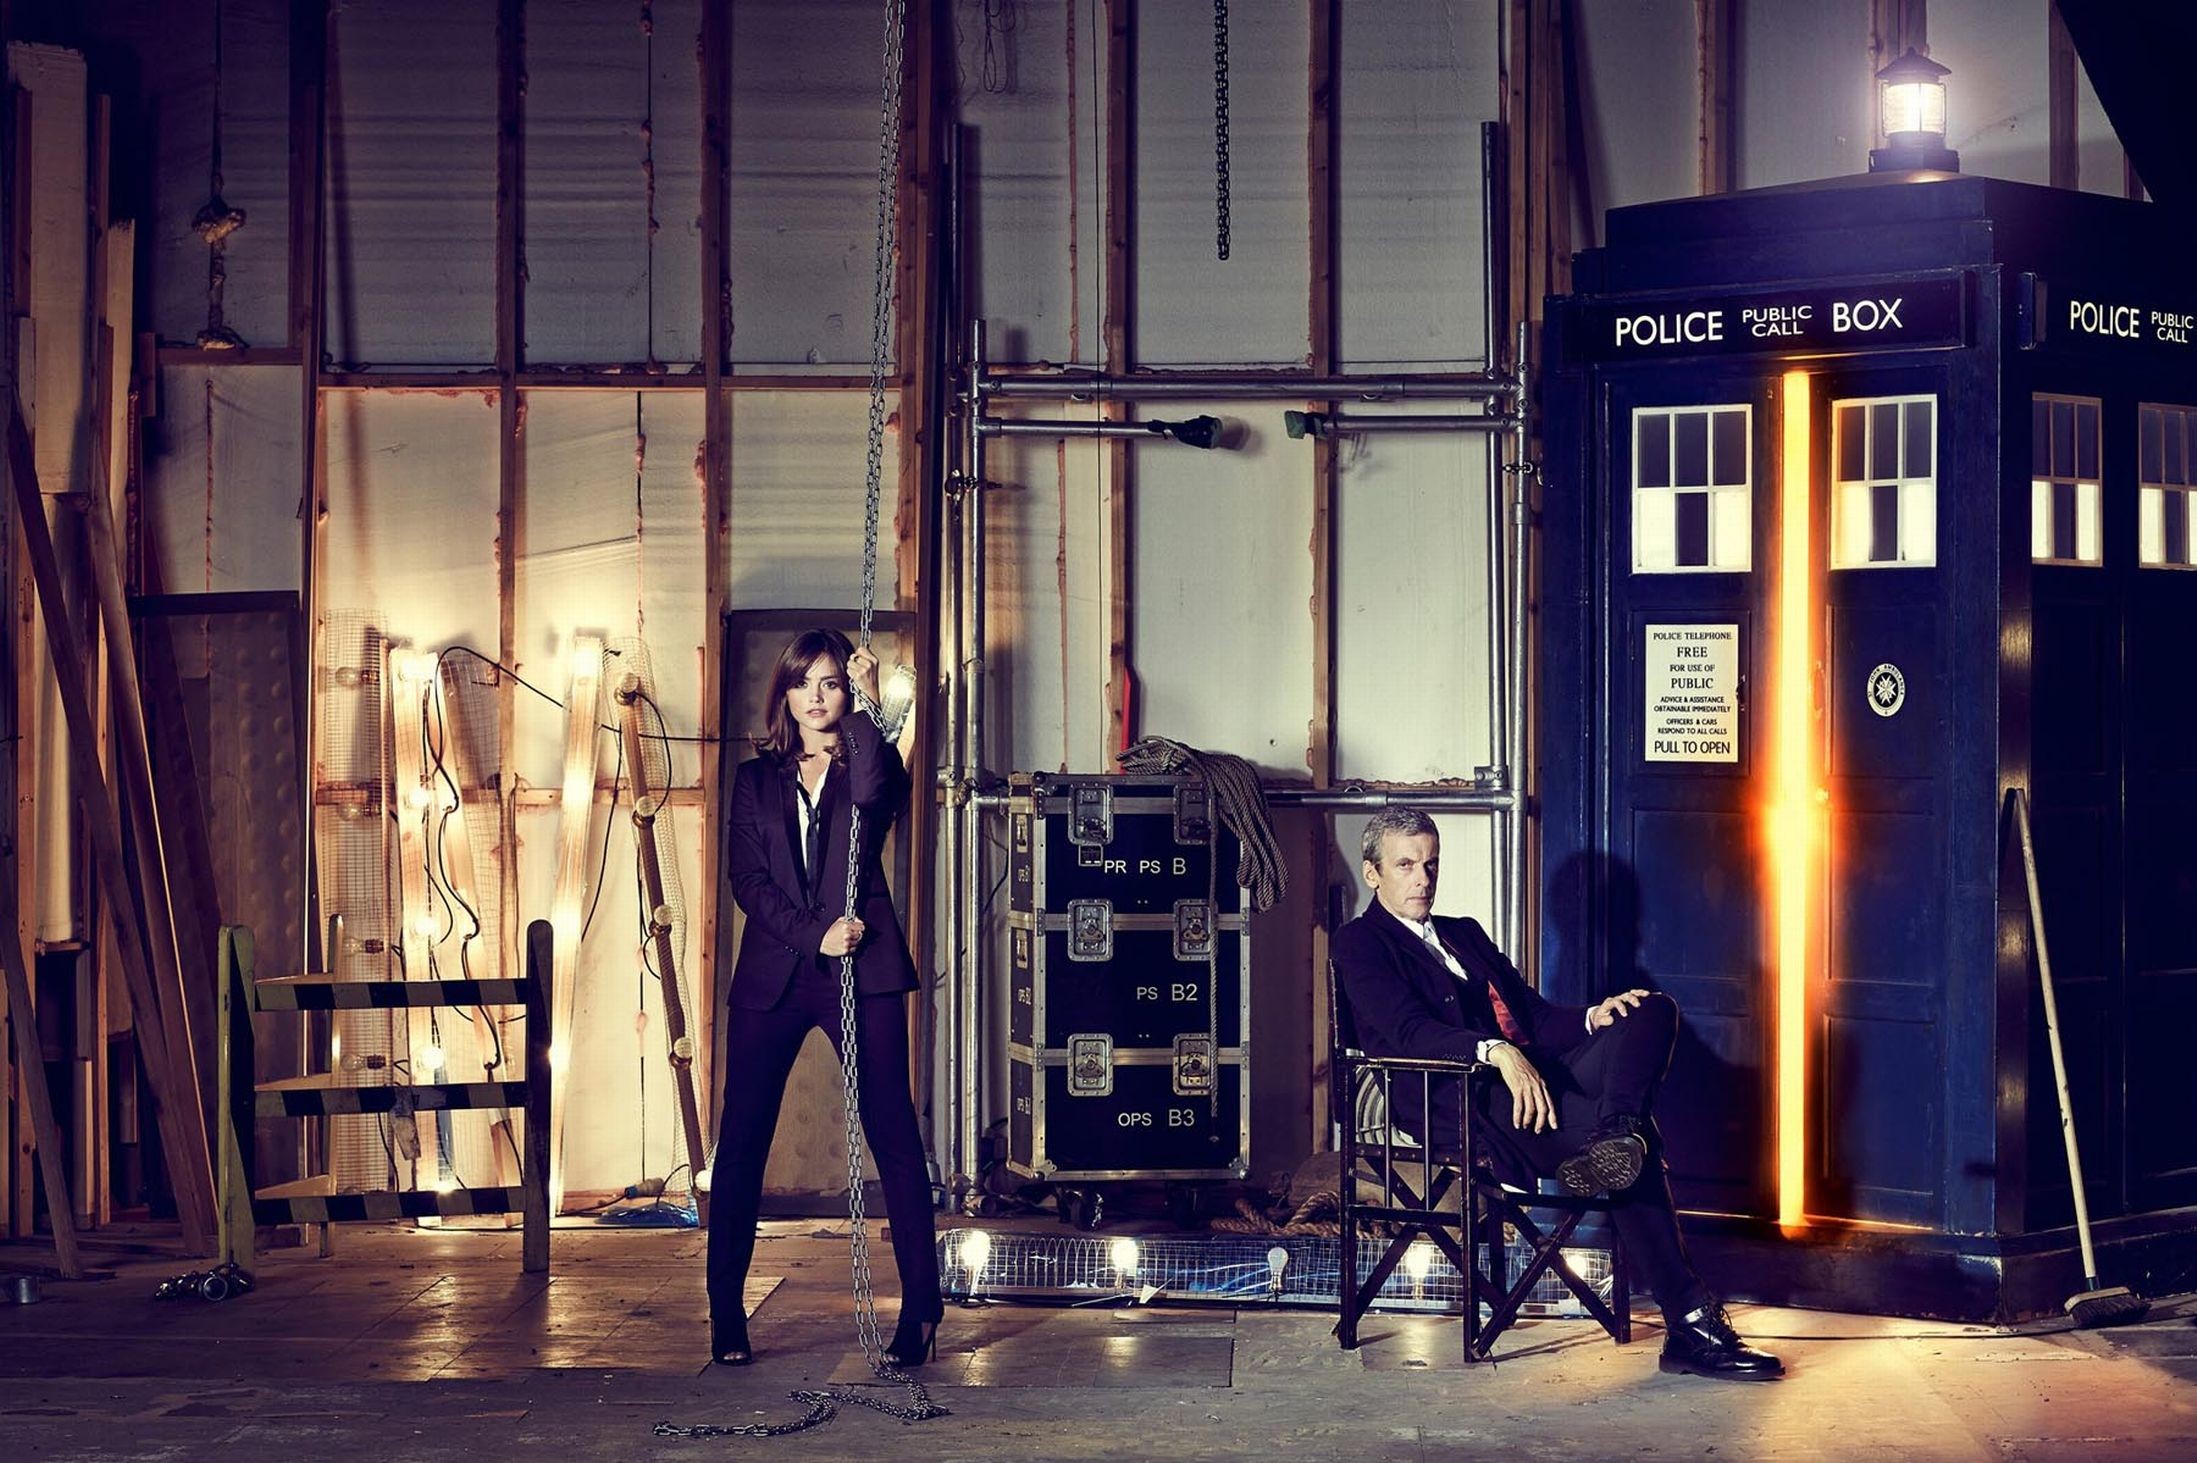 General 2197x1463 The Doctor Doctor Who Peter Capaldi TARDIS Jenna Louise Coleman Clara Oswald BBC TV series science fiction